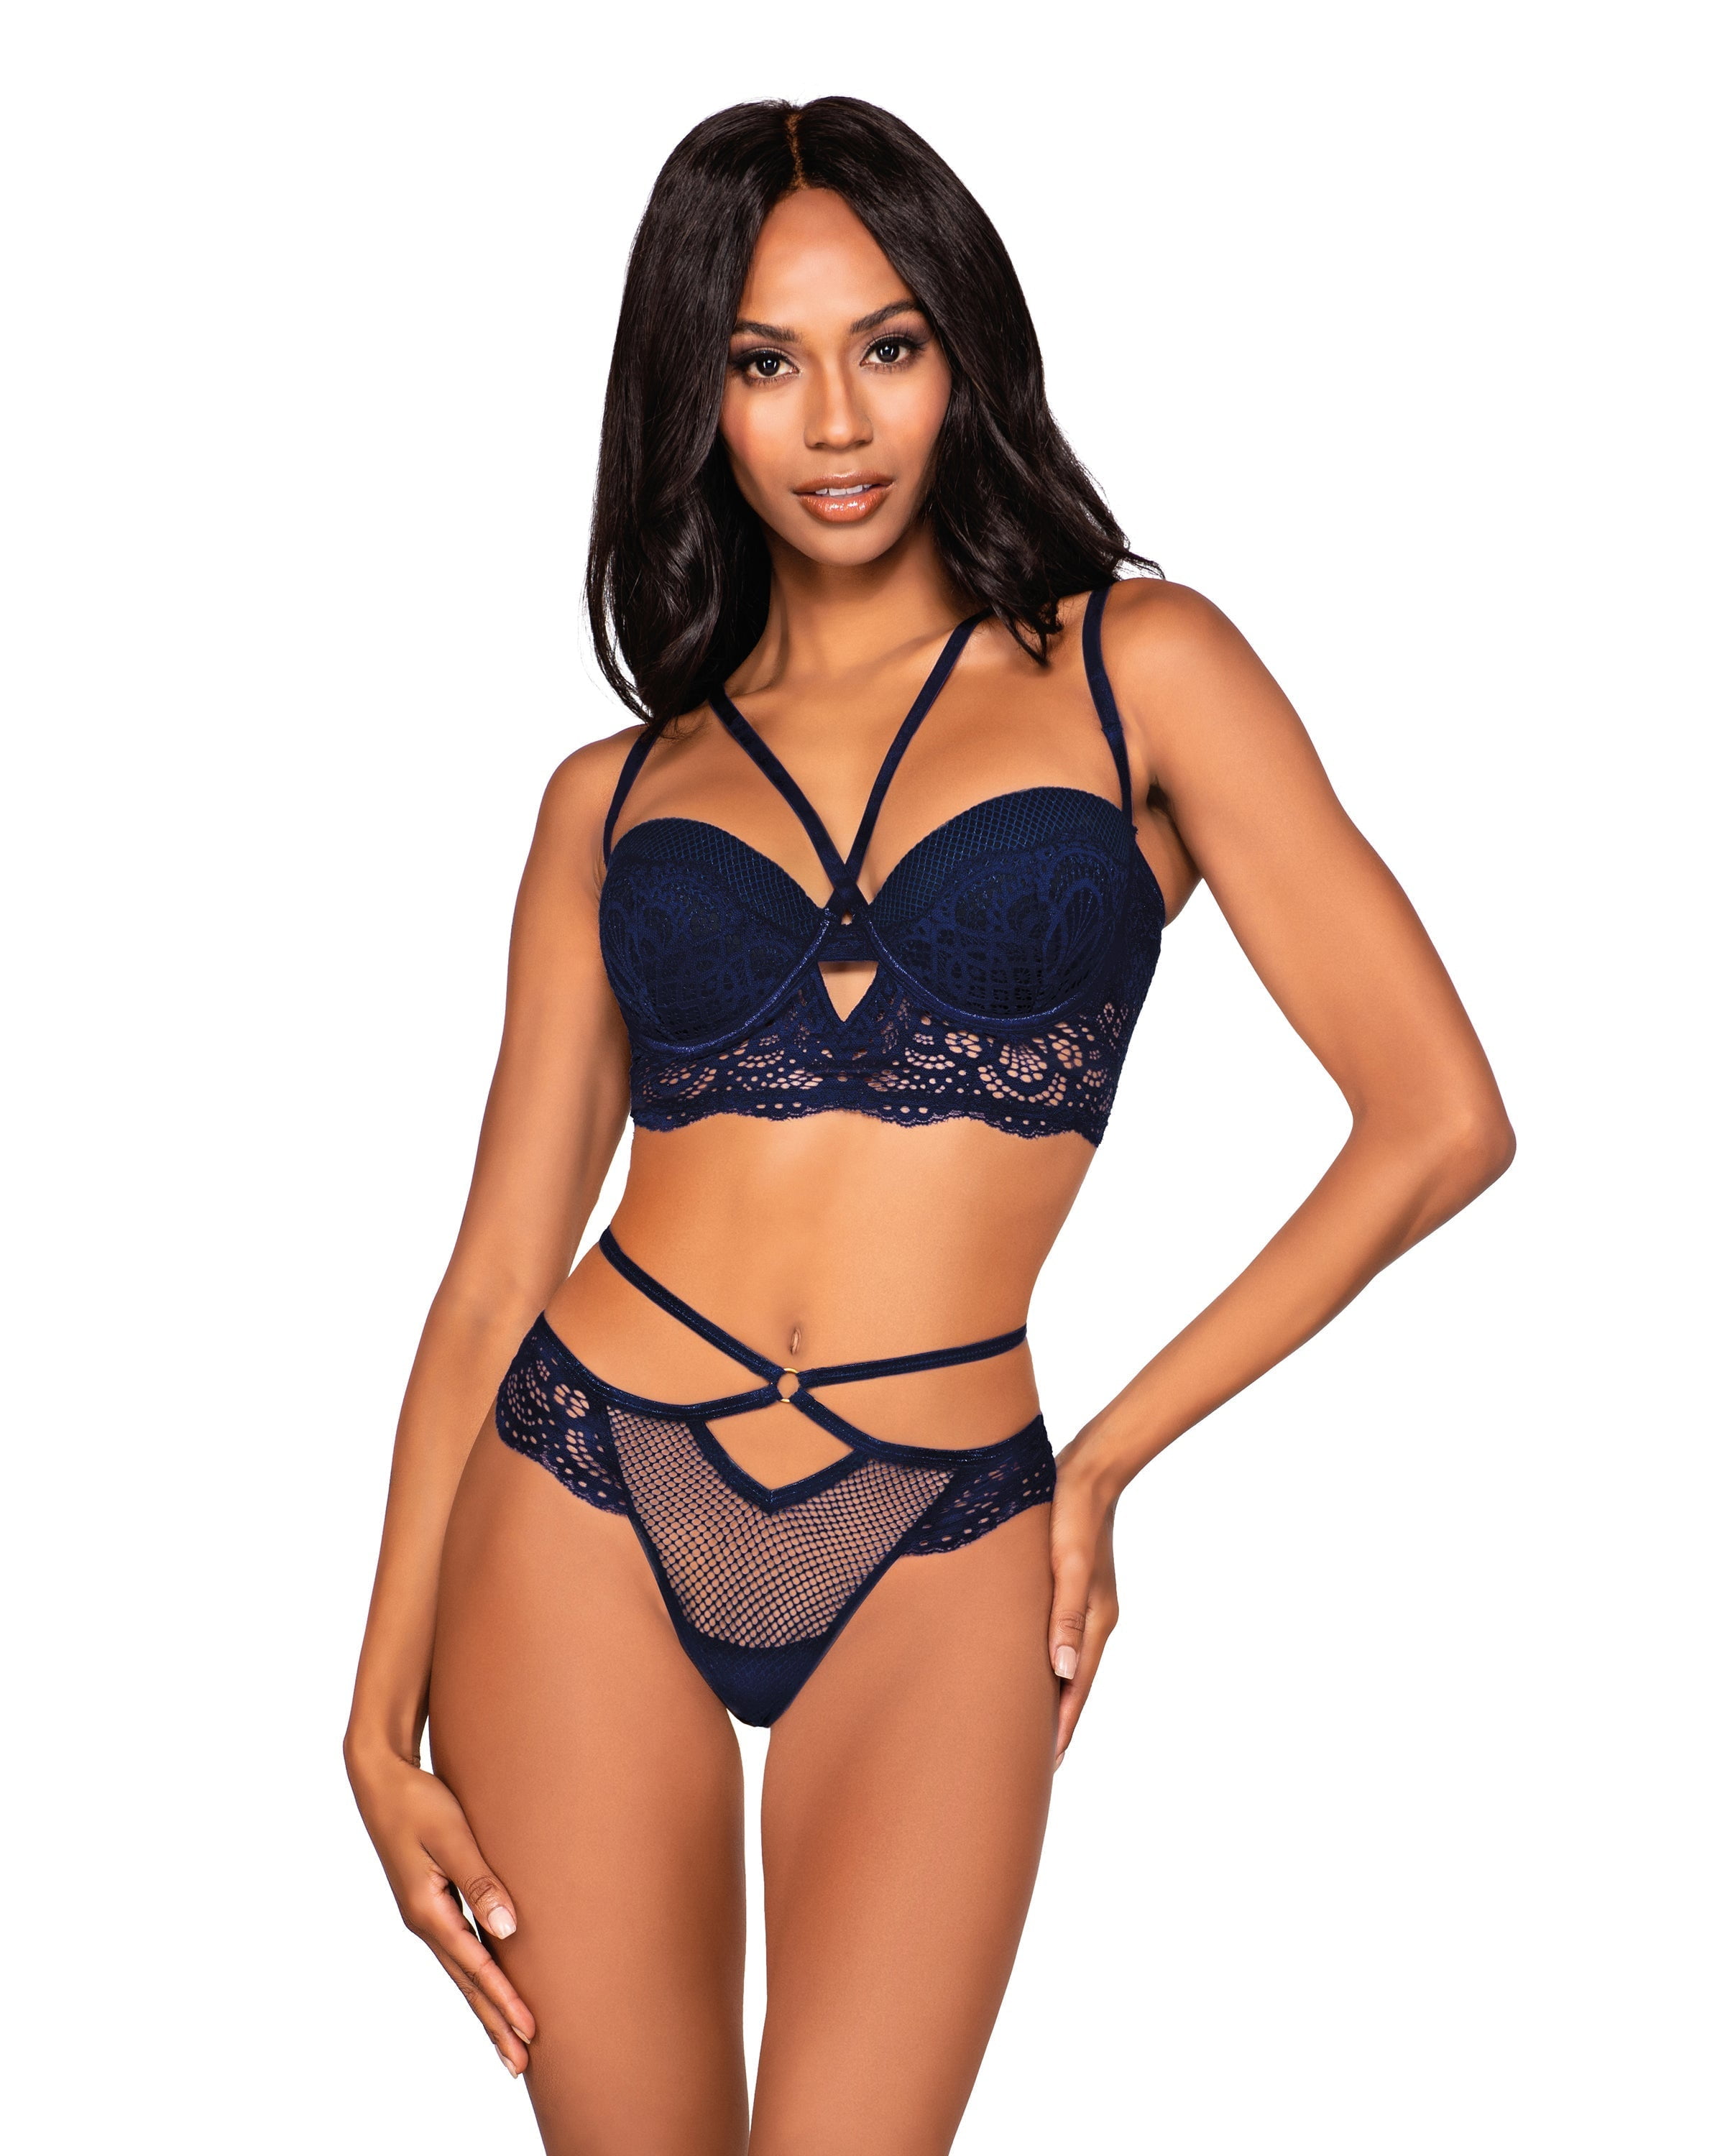 Dreamgirl Fishnet & Scalloped Lace Bra Set with Plunge Neckline